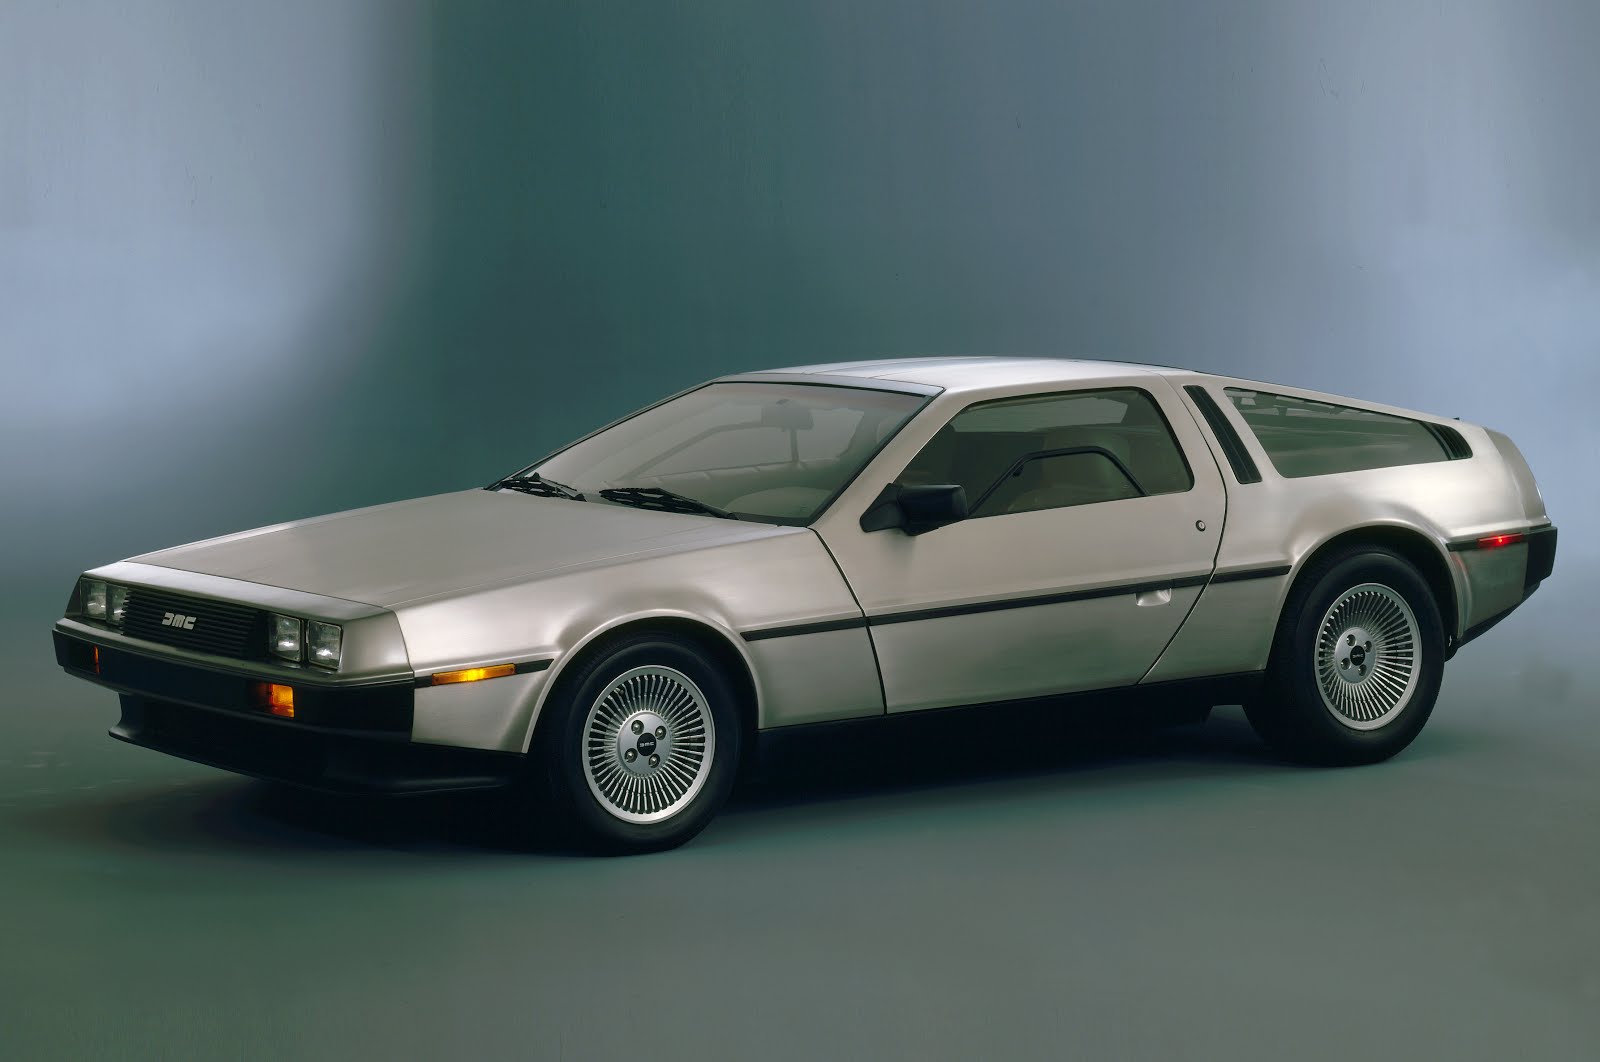 What were the top 20 cars of the 1980’s?